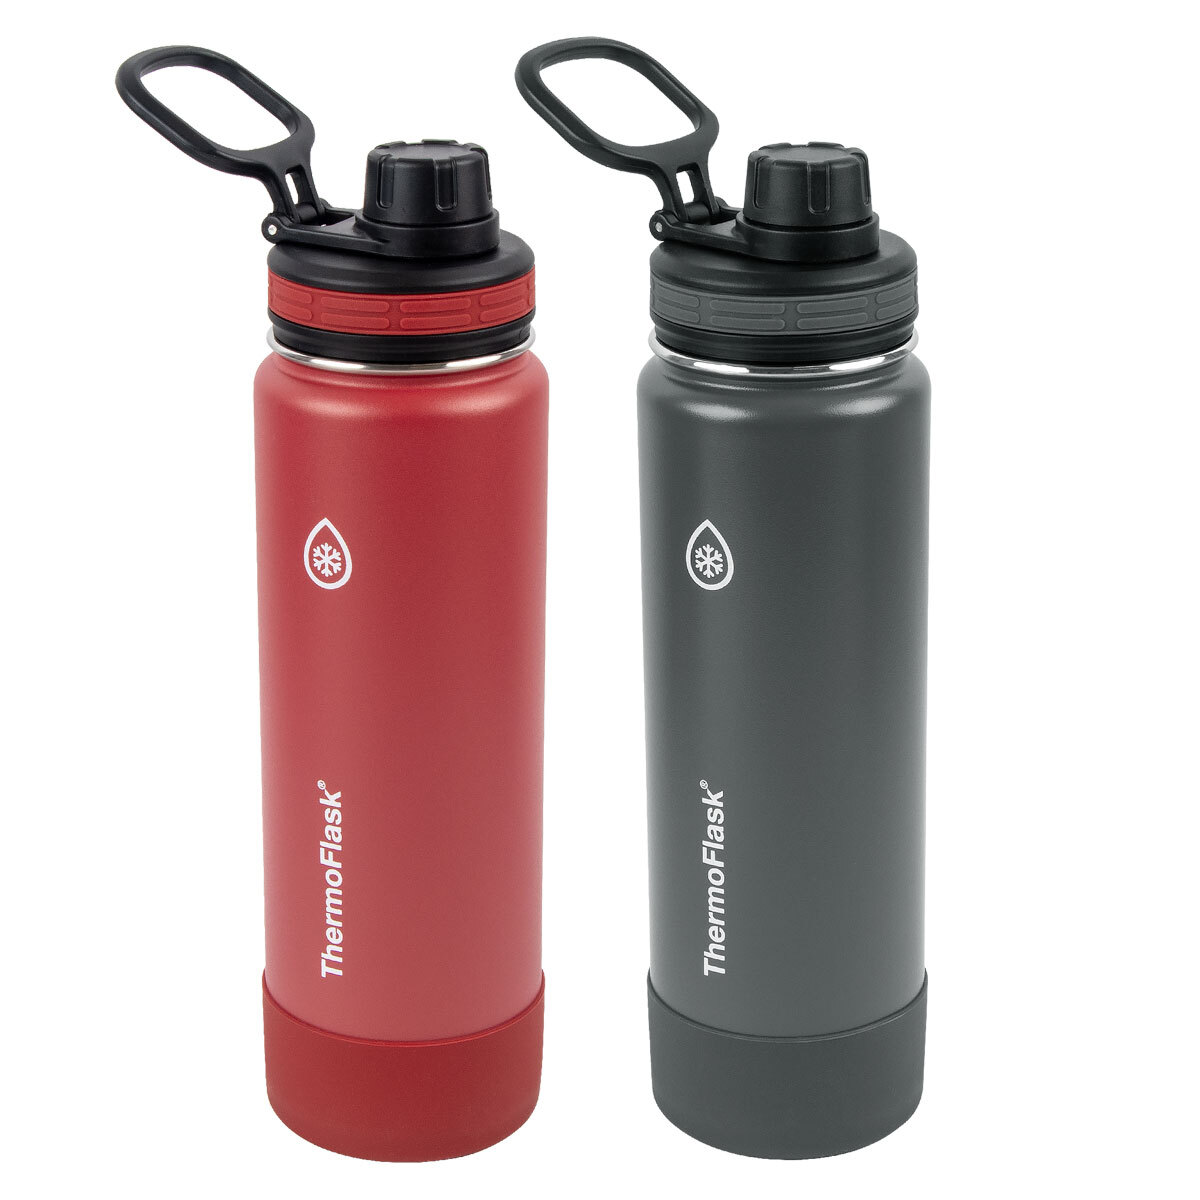 Takeya Actives Insulated Stainless Water Bottle with Insulated Spout Lid Renewed Onyx 18oz 